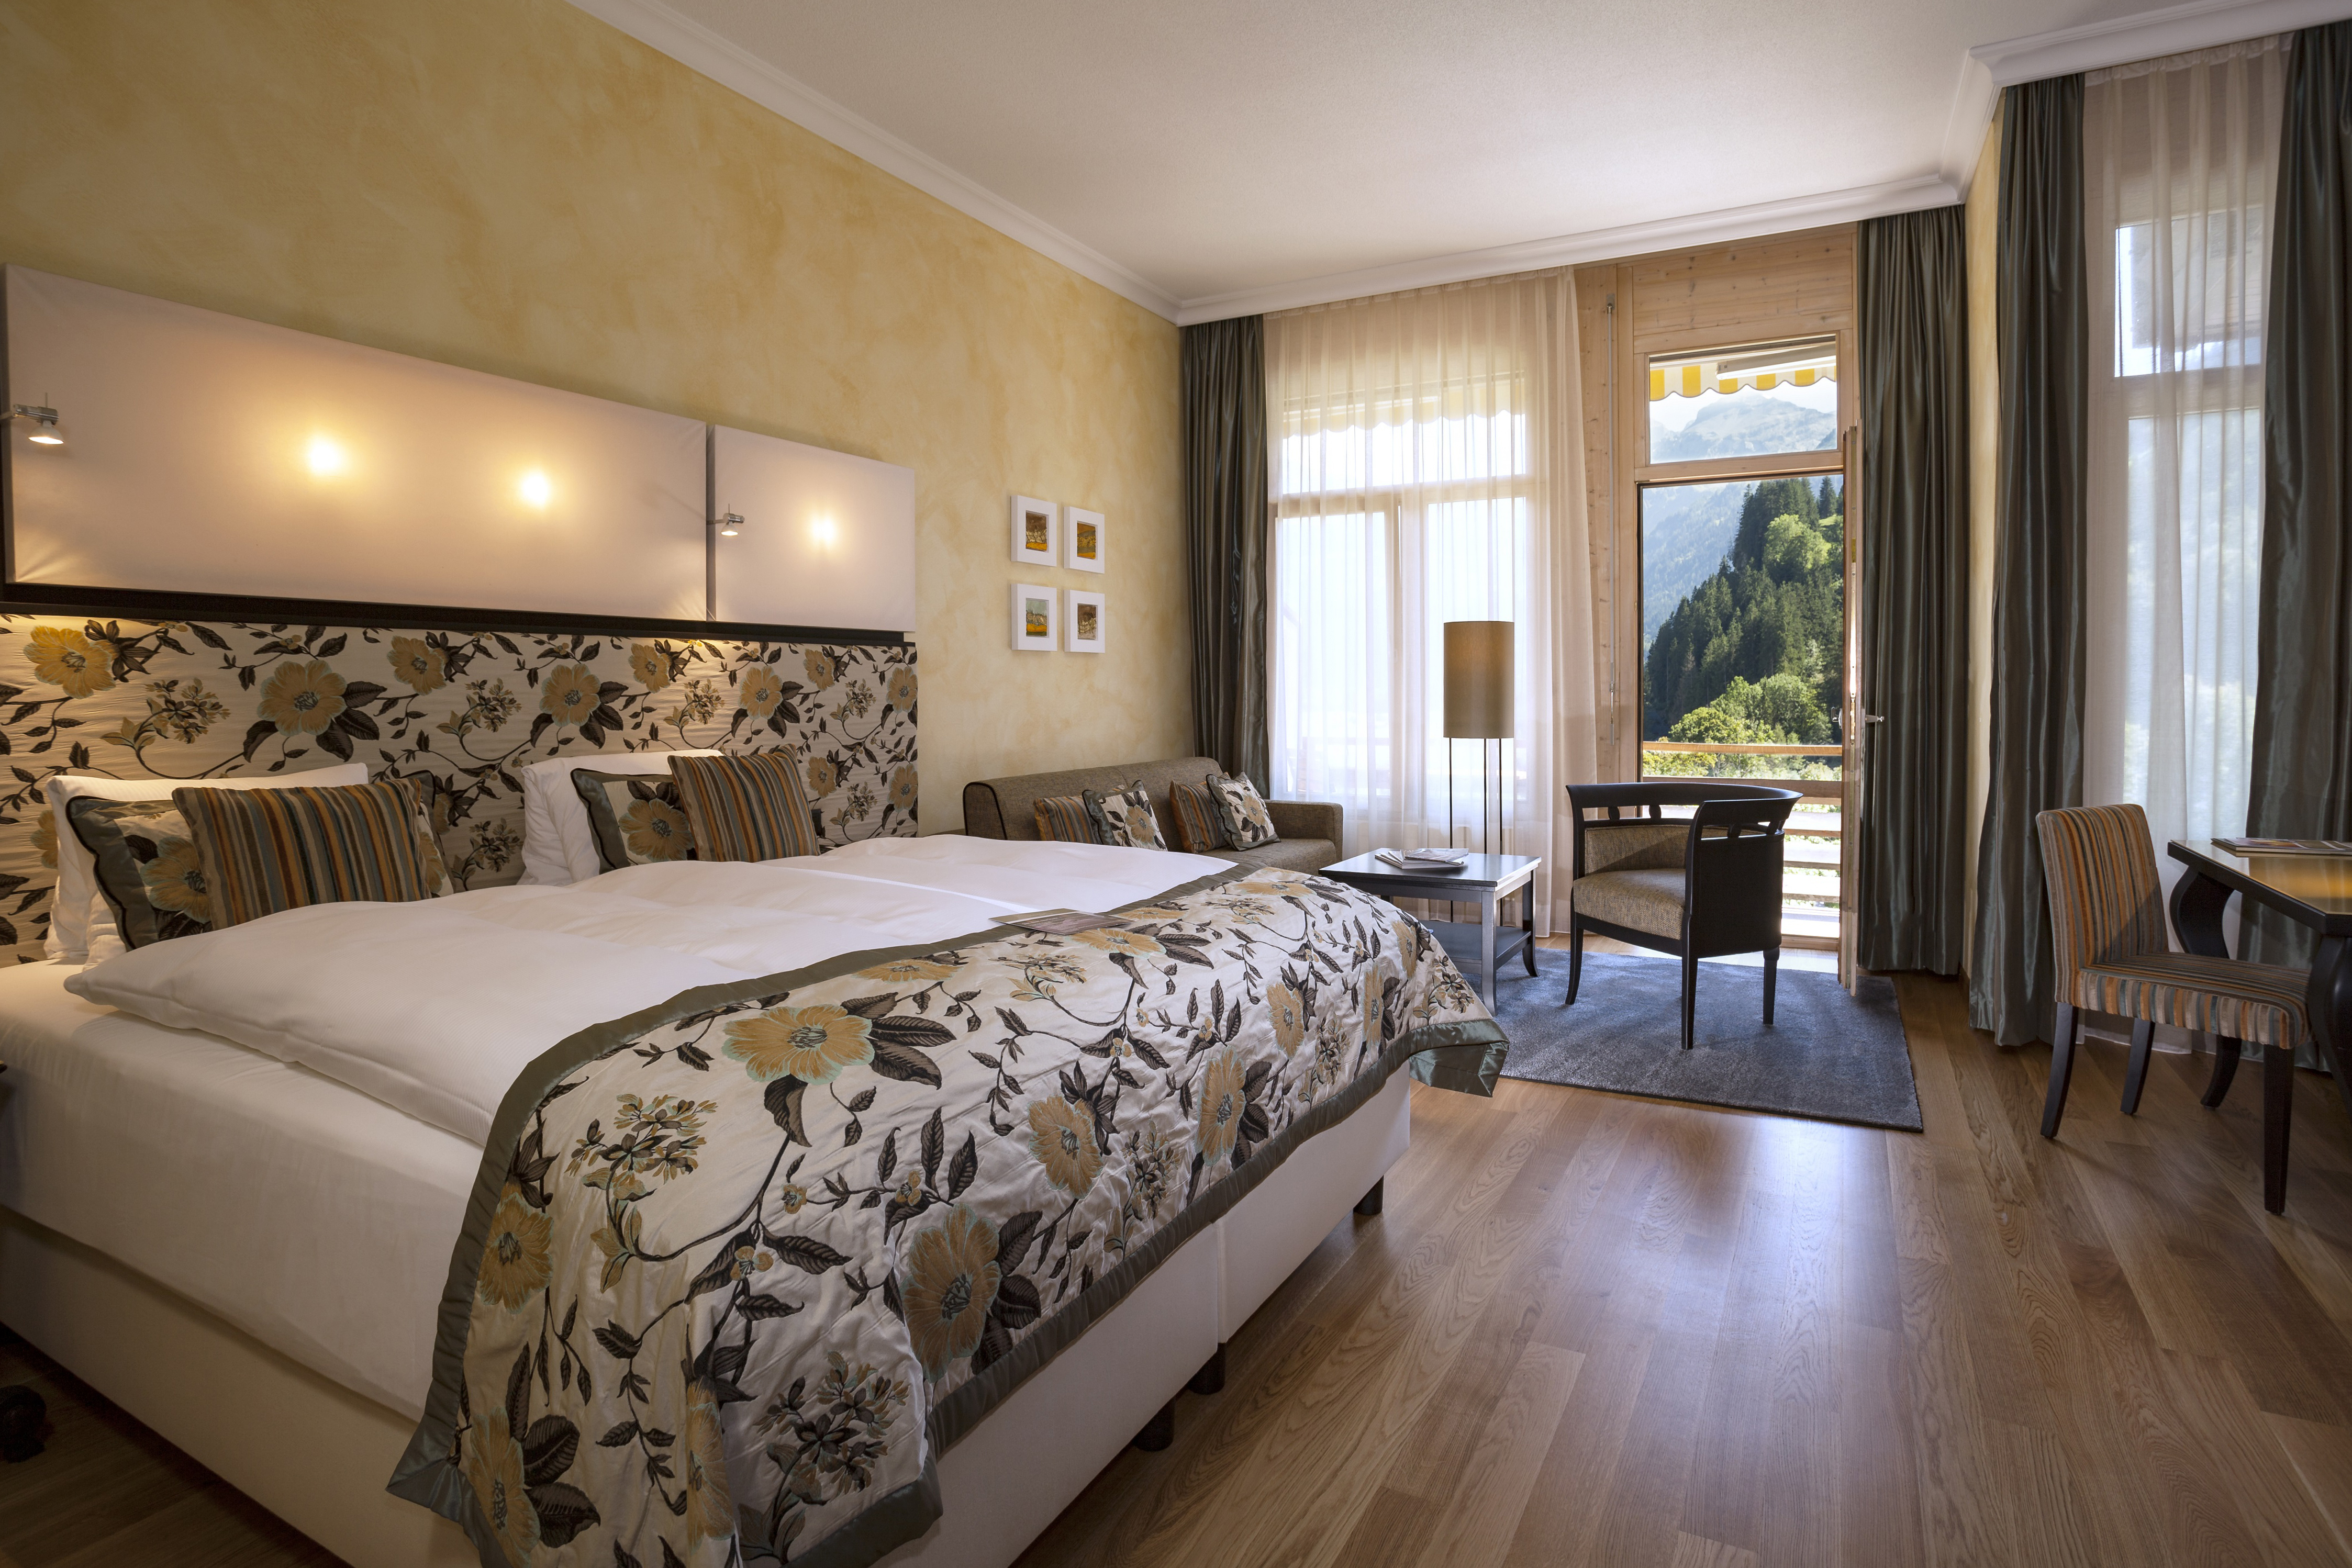 Overnight stay in our „rooms for dreams“ - Special offers for Mother's Day